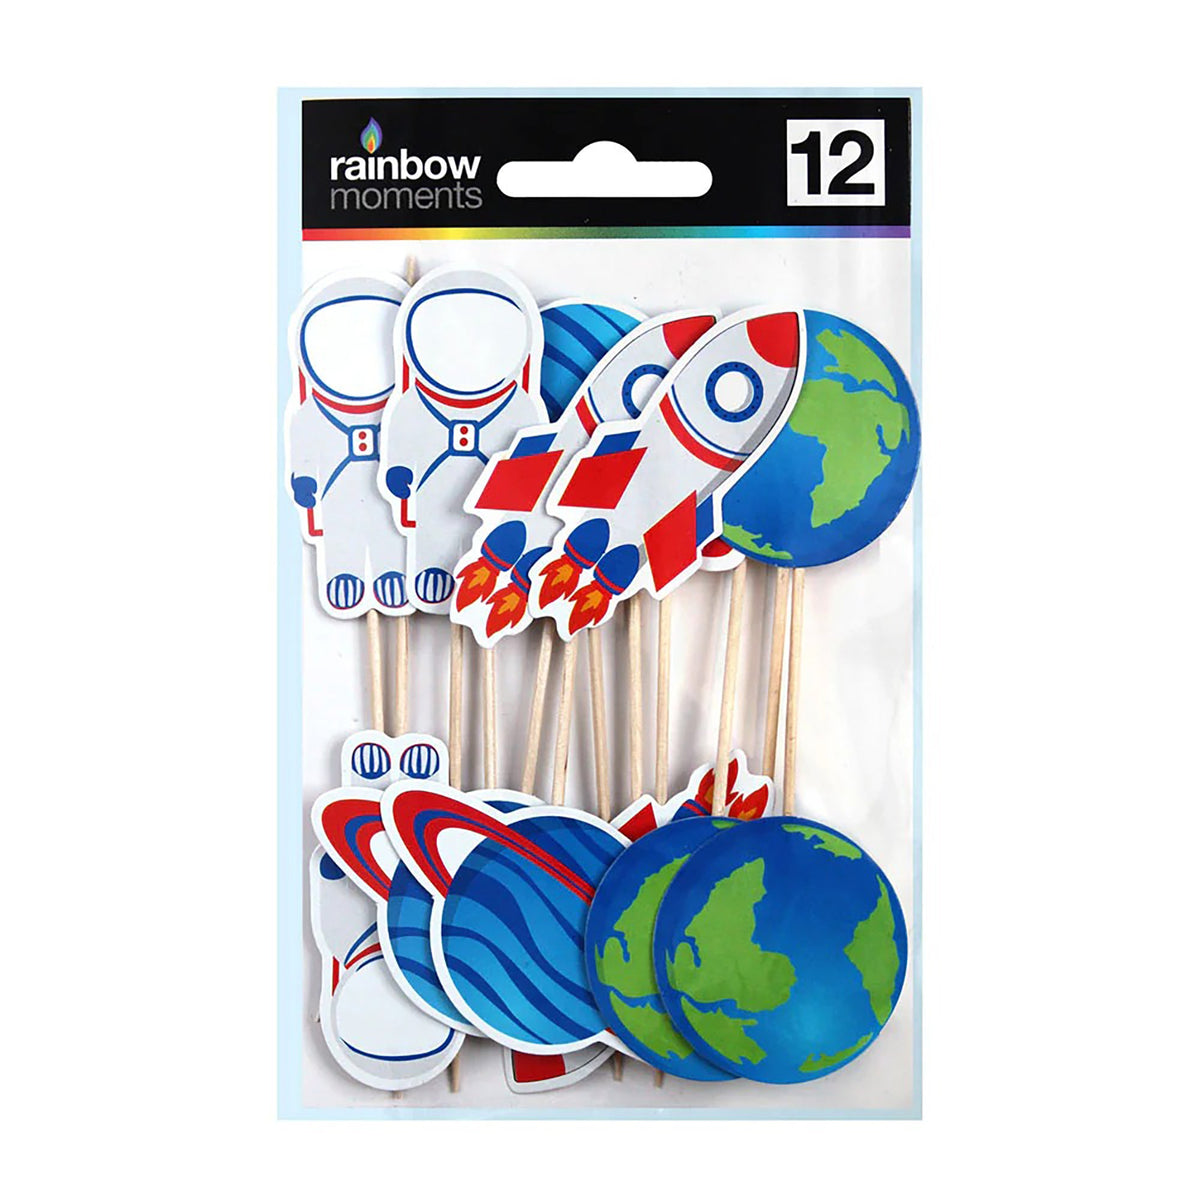 GLOCO ACCENTS INC Cake Supplies Party Picks, Space, 8 Count 885093008870